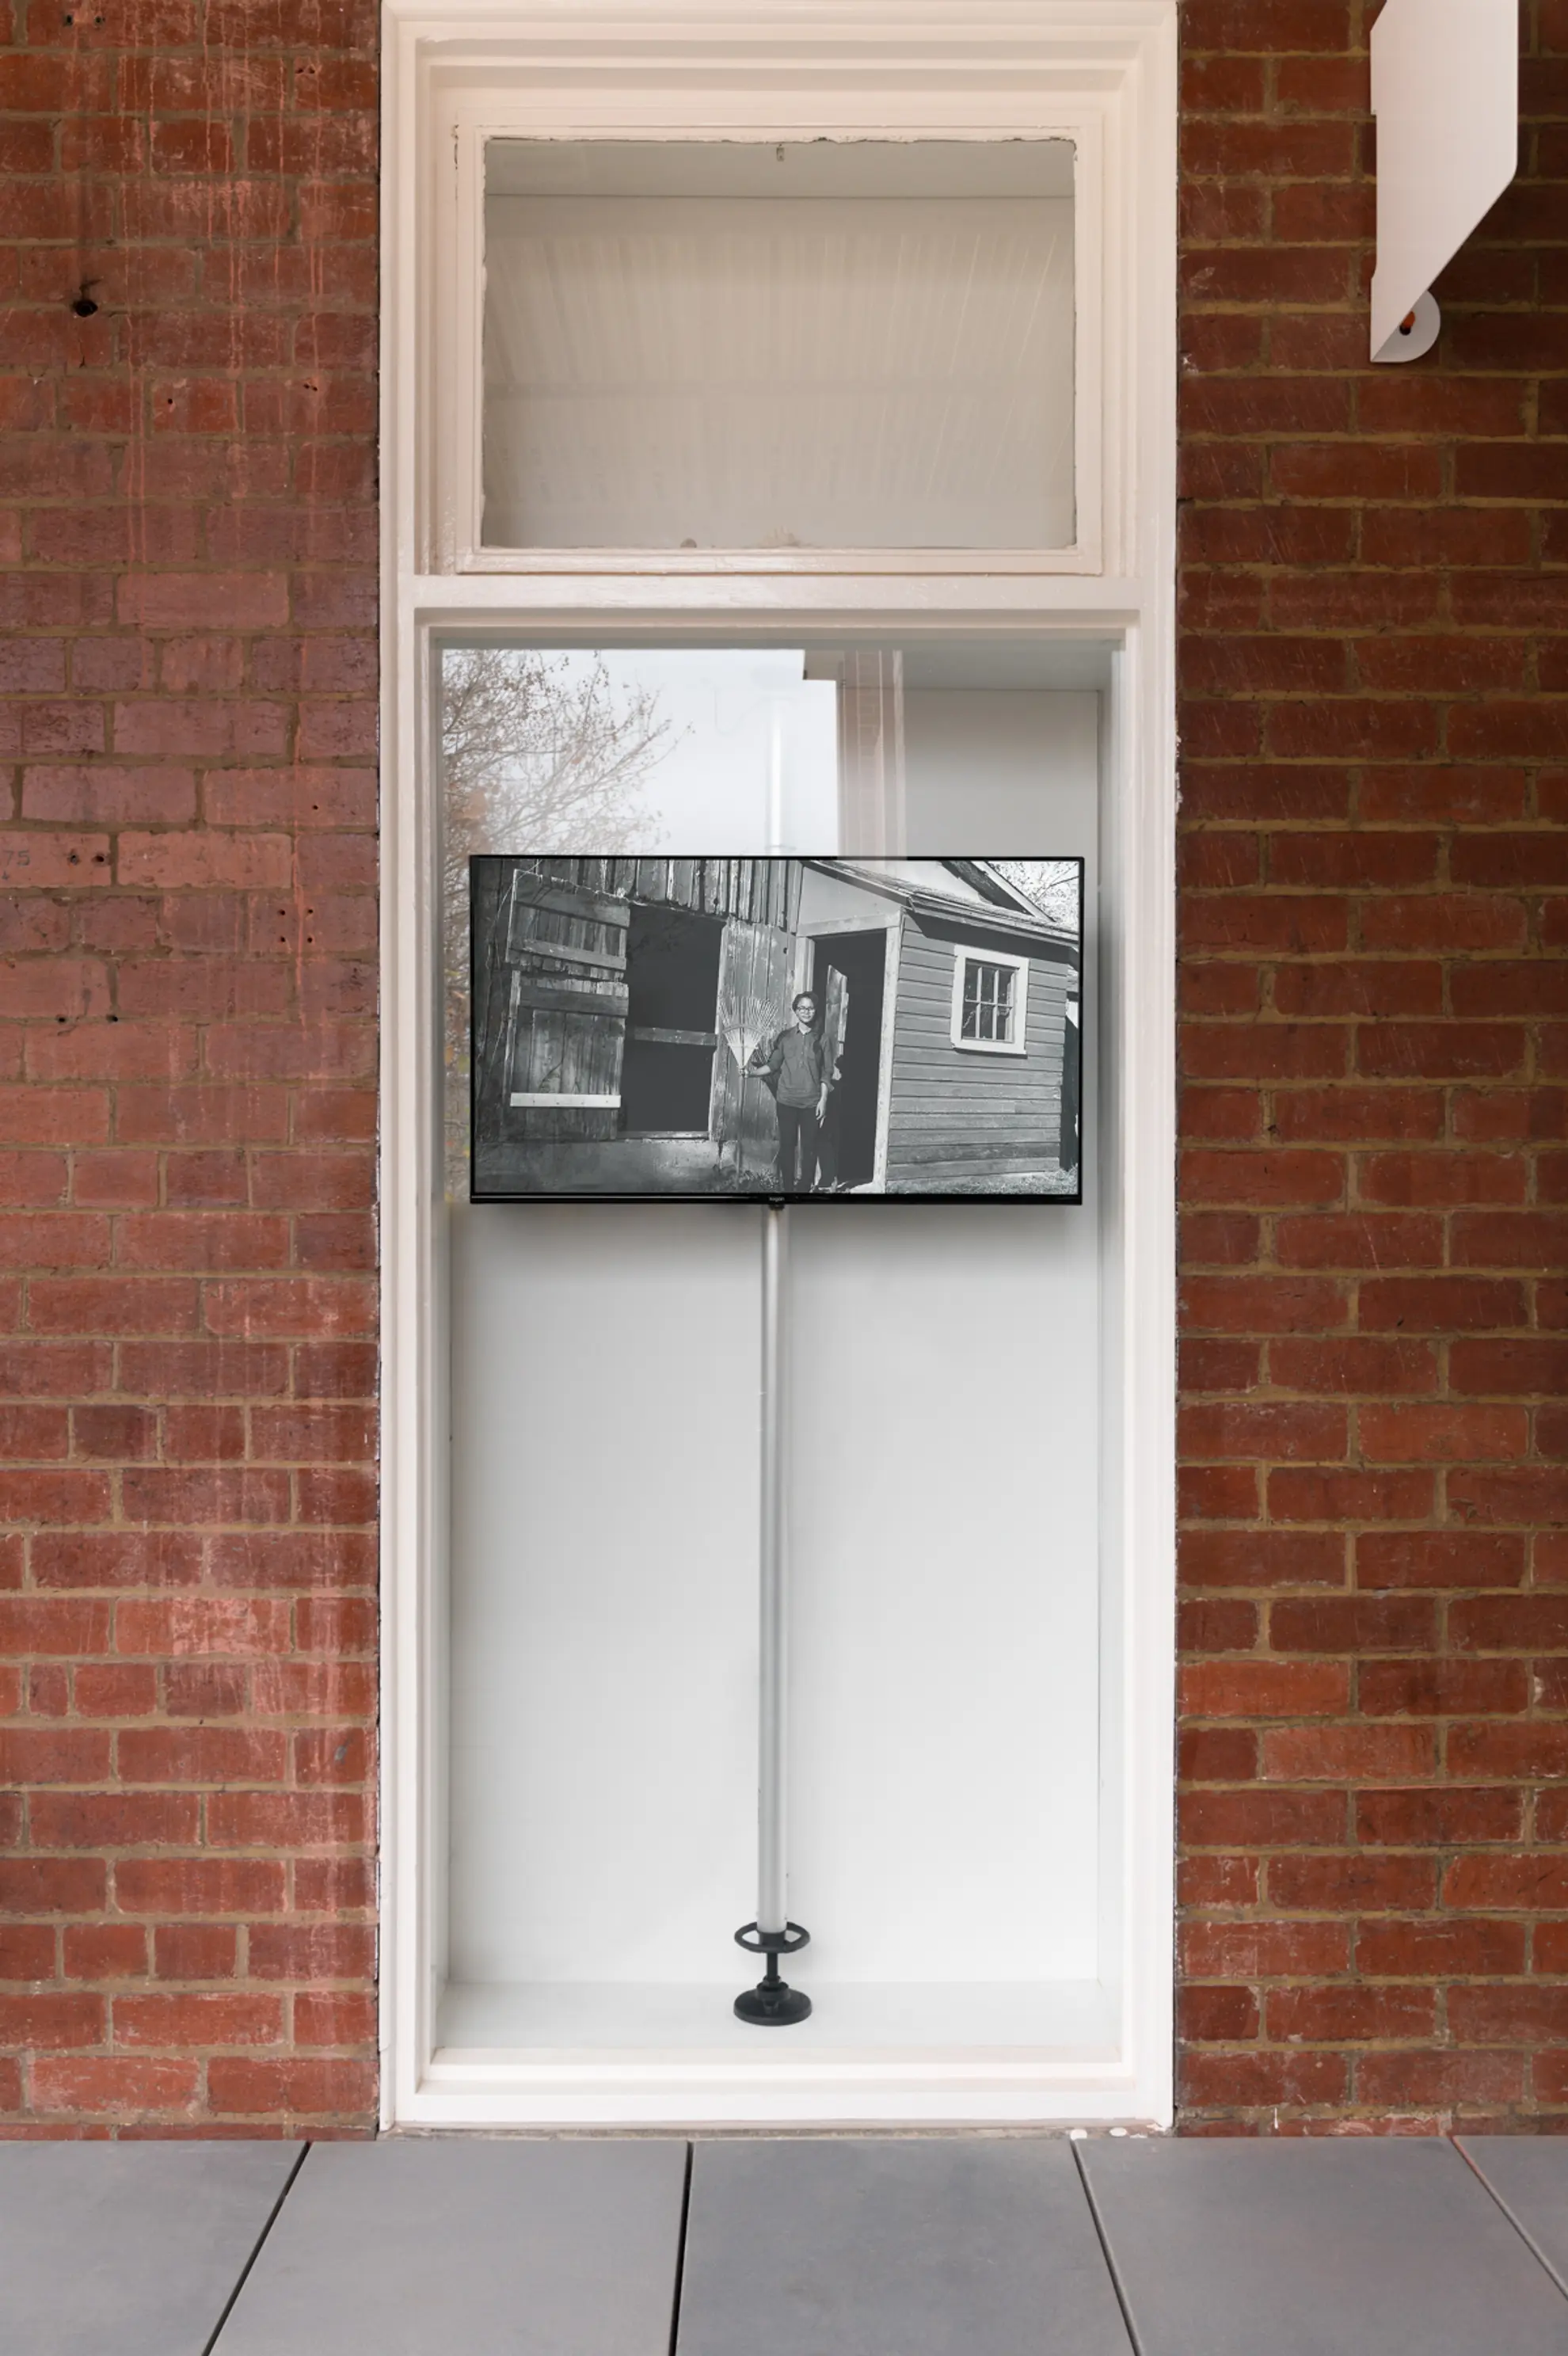 Straight on view of the West Space window. In the top section of the large window pane, is a rectangular screen showing a black and white image of a man standing outside a wooden house. The screen is sitting on a silver pole with a black base.